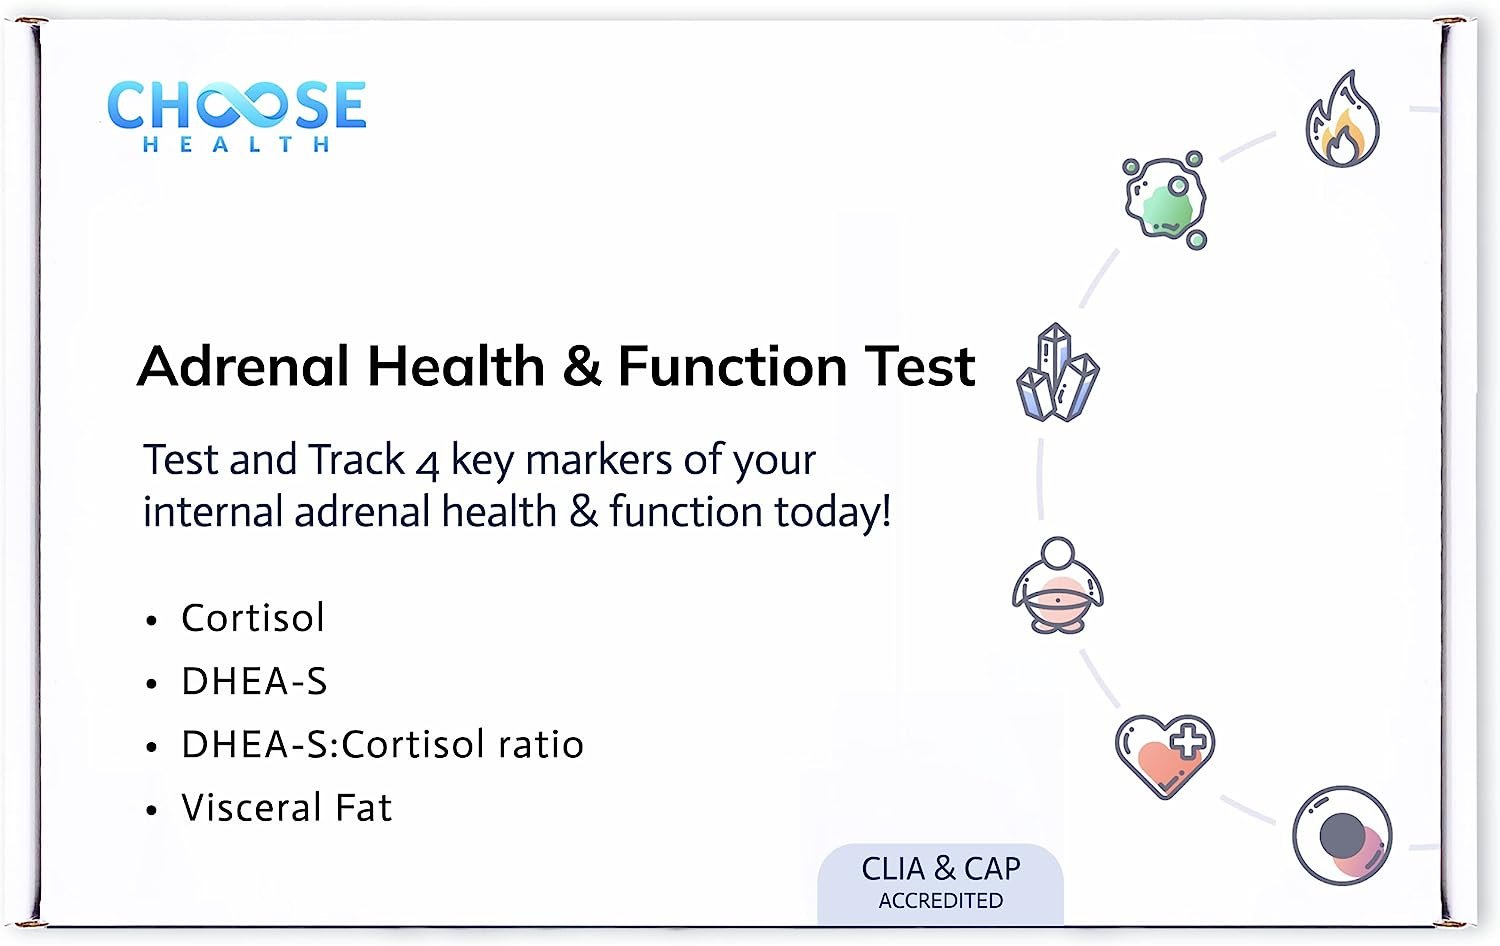 Choose Health 4-in-1 Cortisol & DHEA-S Test Review